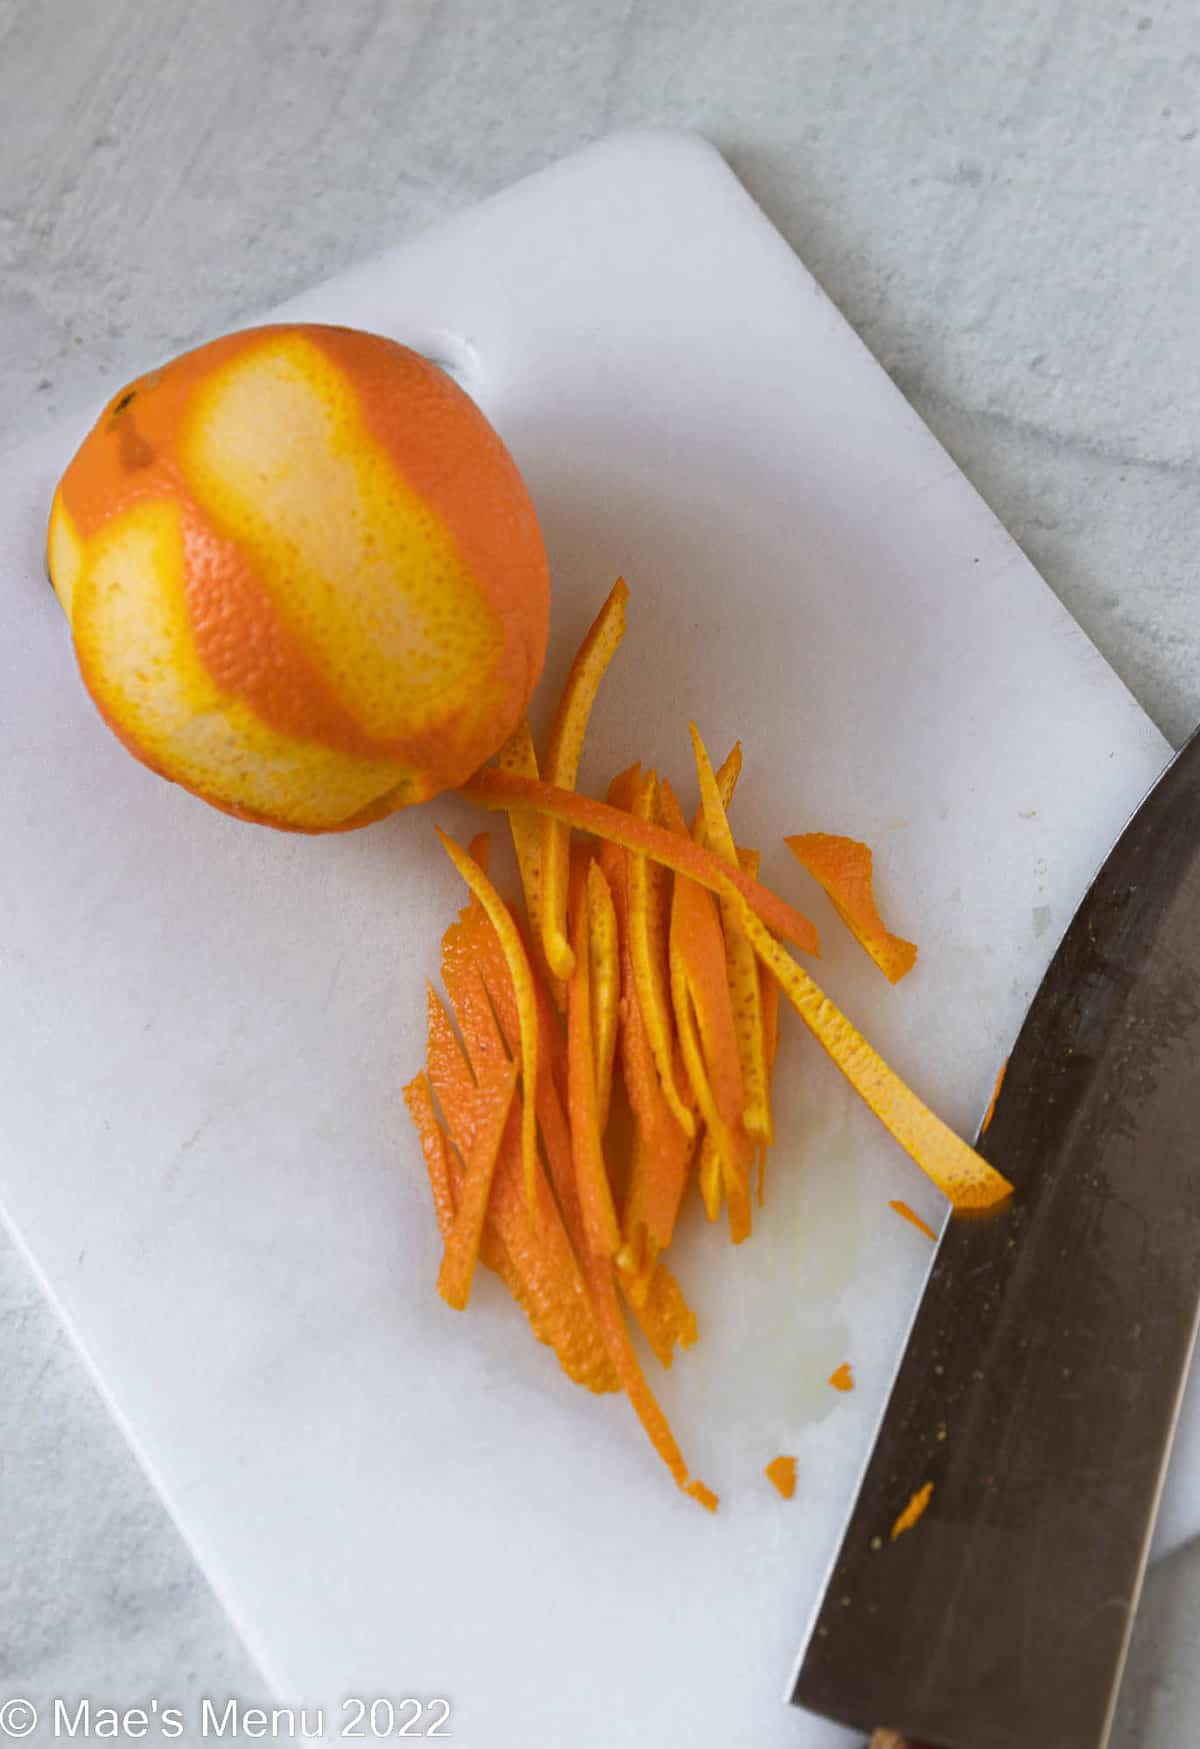 Sliced orange zest on a cutting board with a knife.